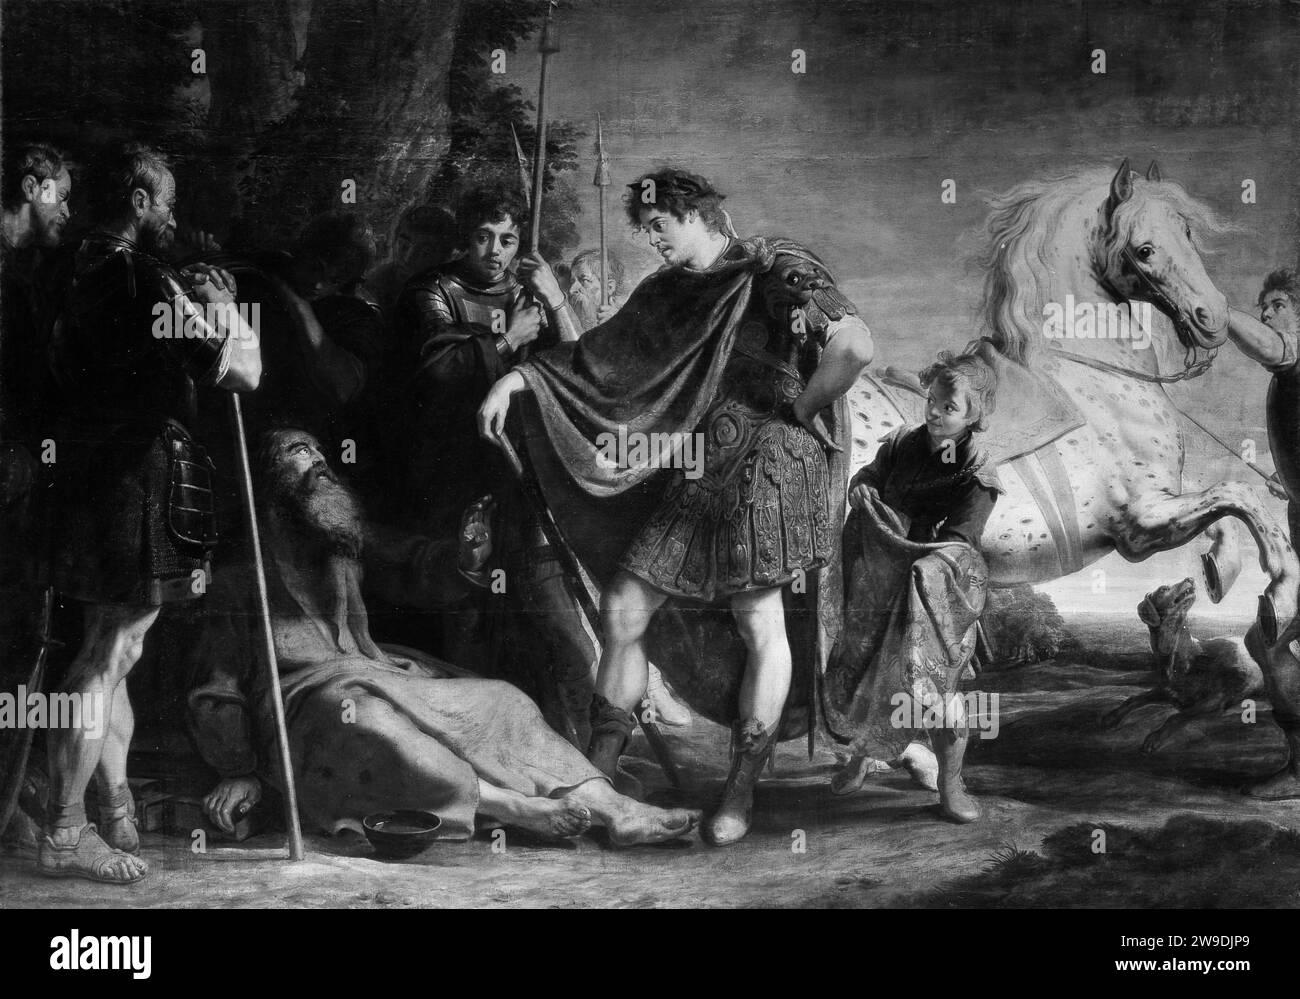 The Meeting of Alexander the Great and Diogenes 1871 by Gaspar de Crayer Stock Photo